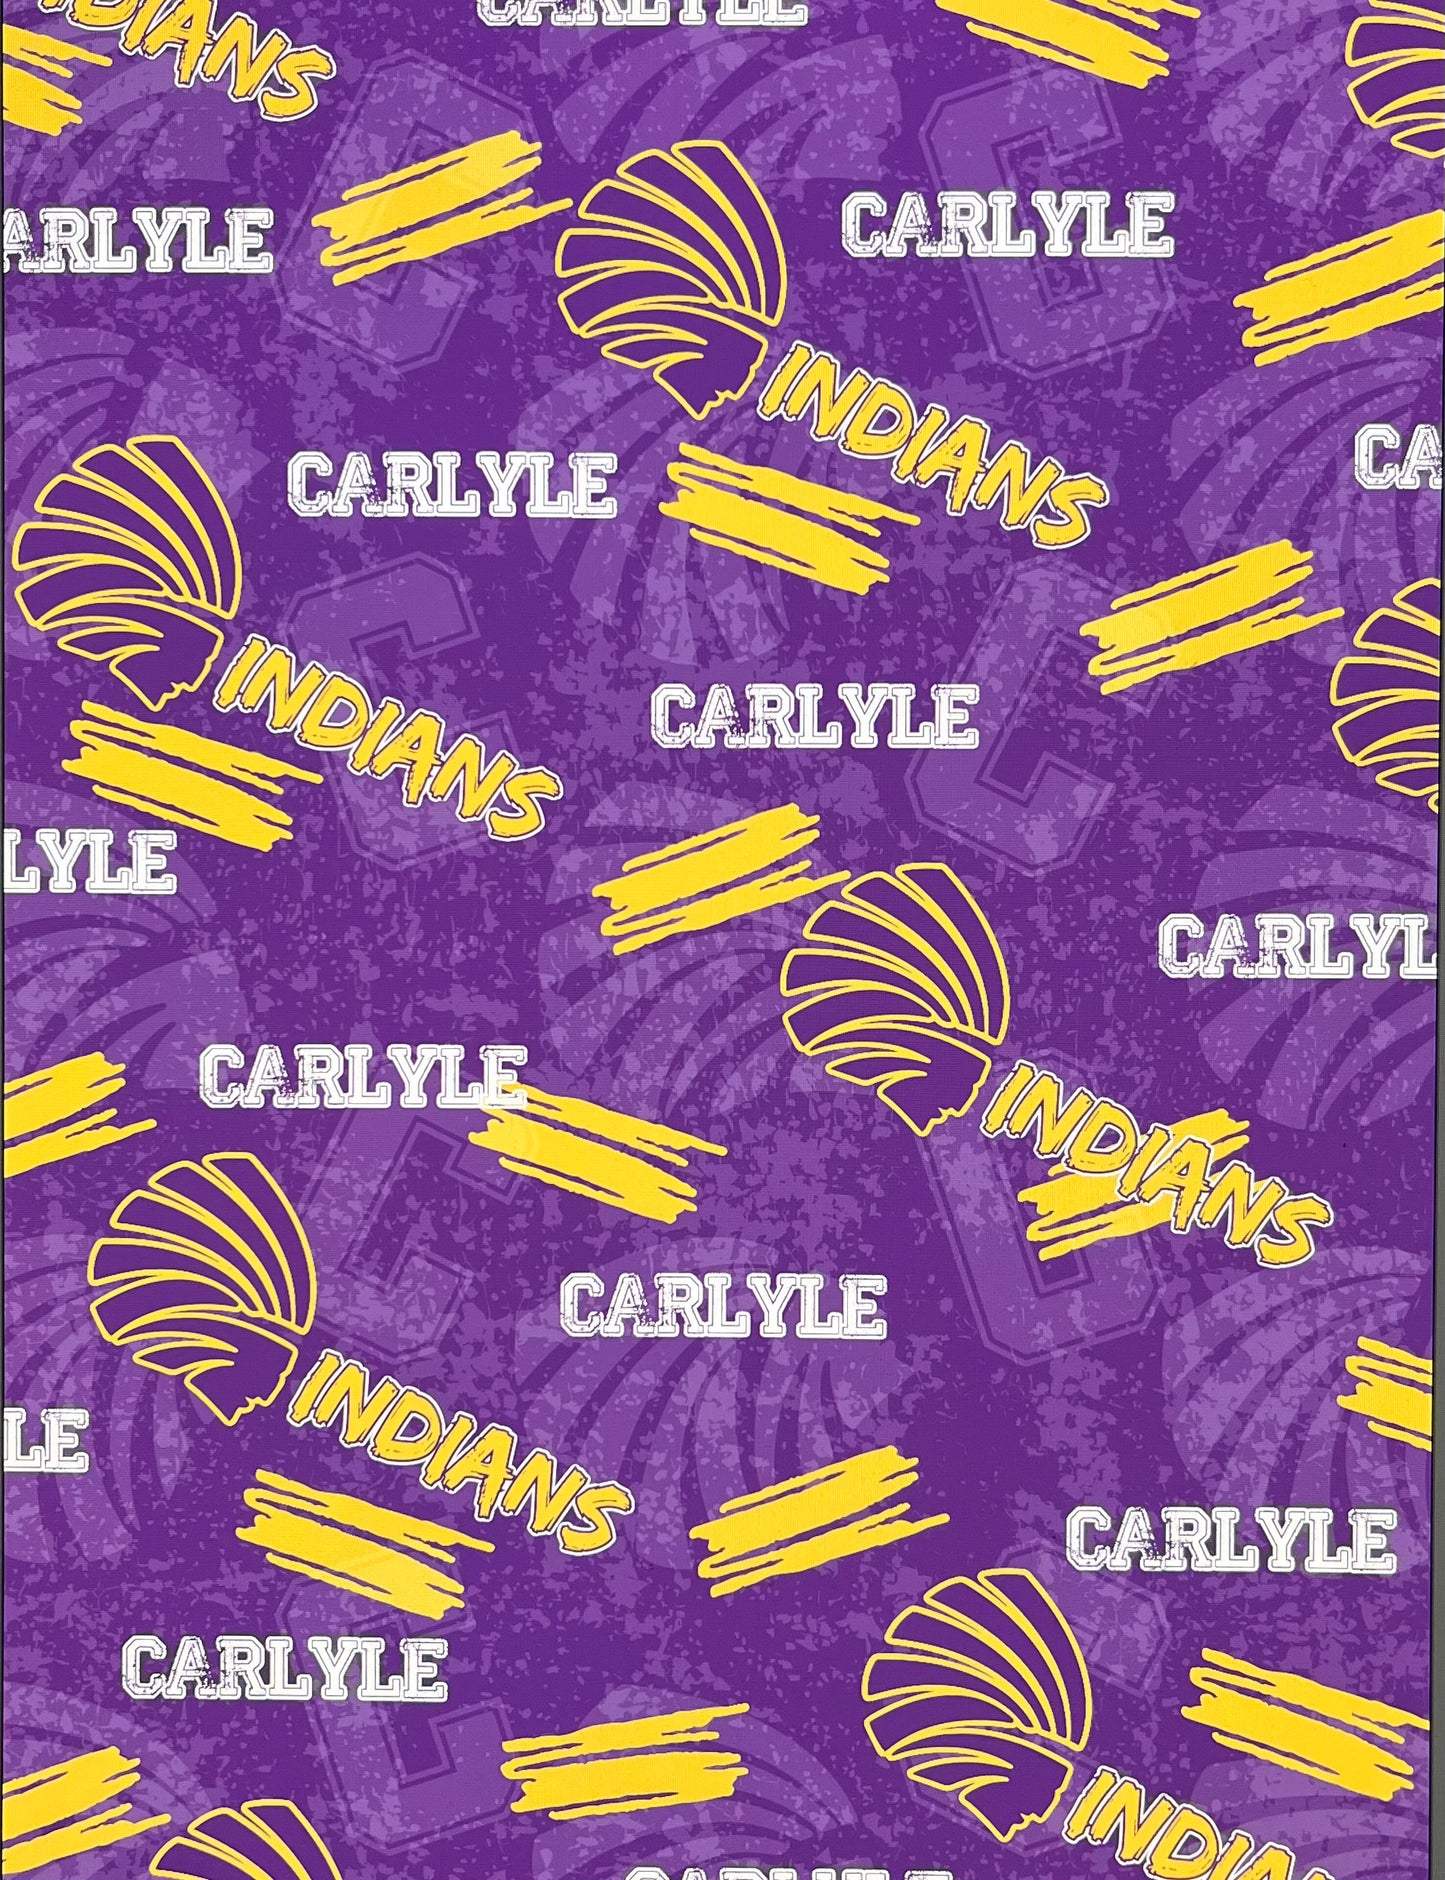 Carlyle Indians - Team Blanket